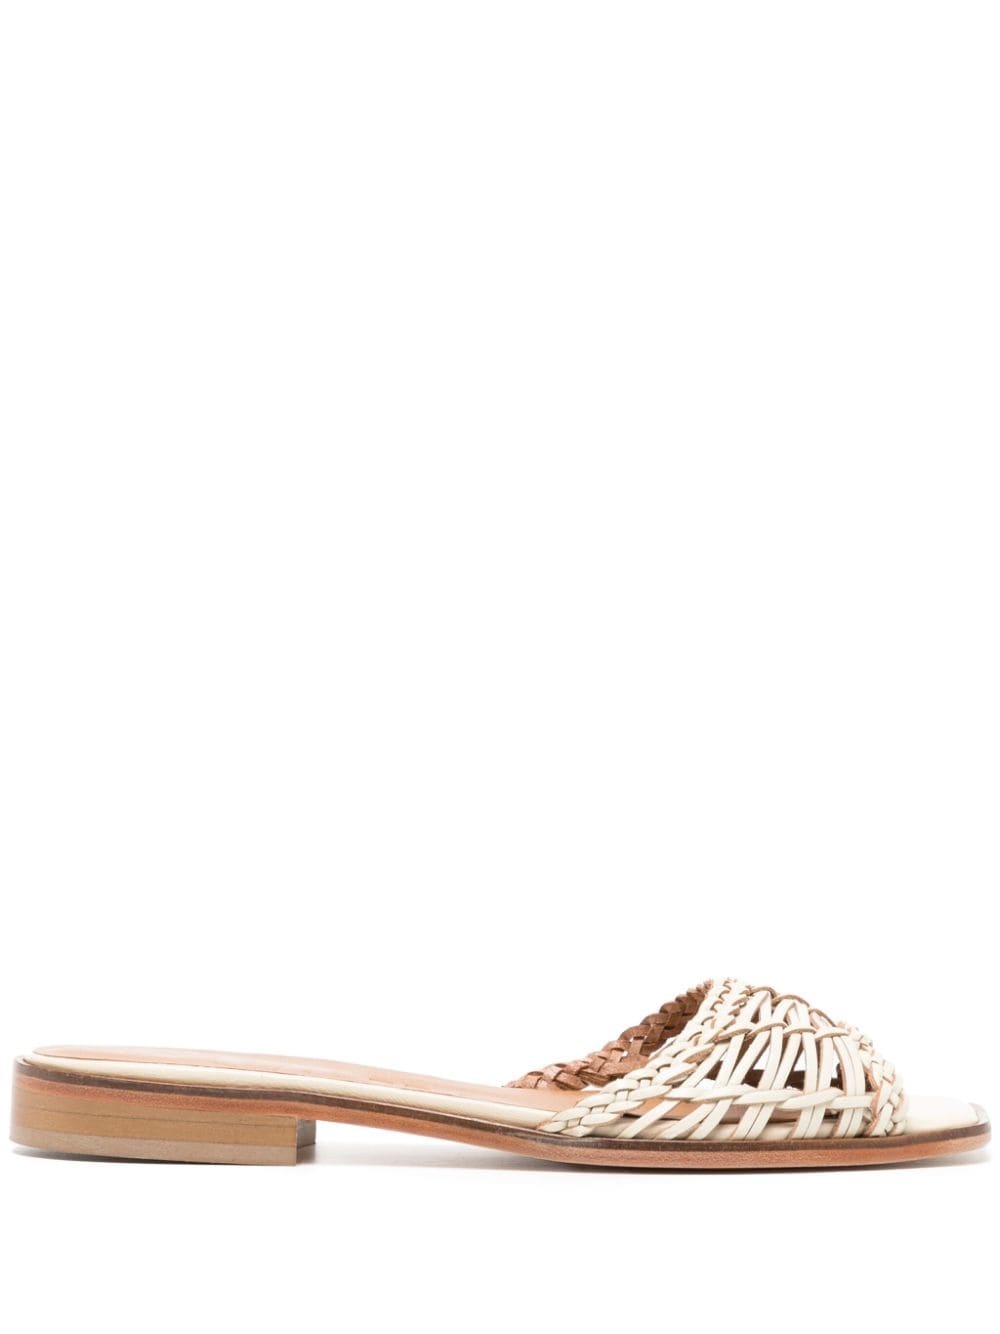 woven-strap flat leather sandals - 1